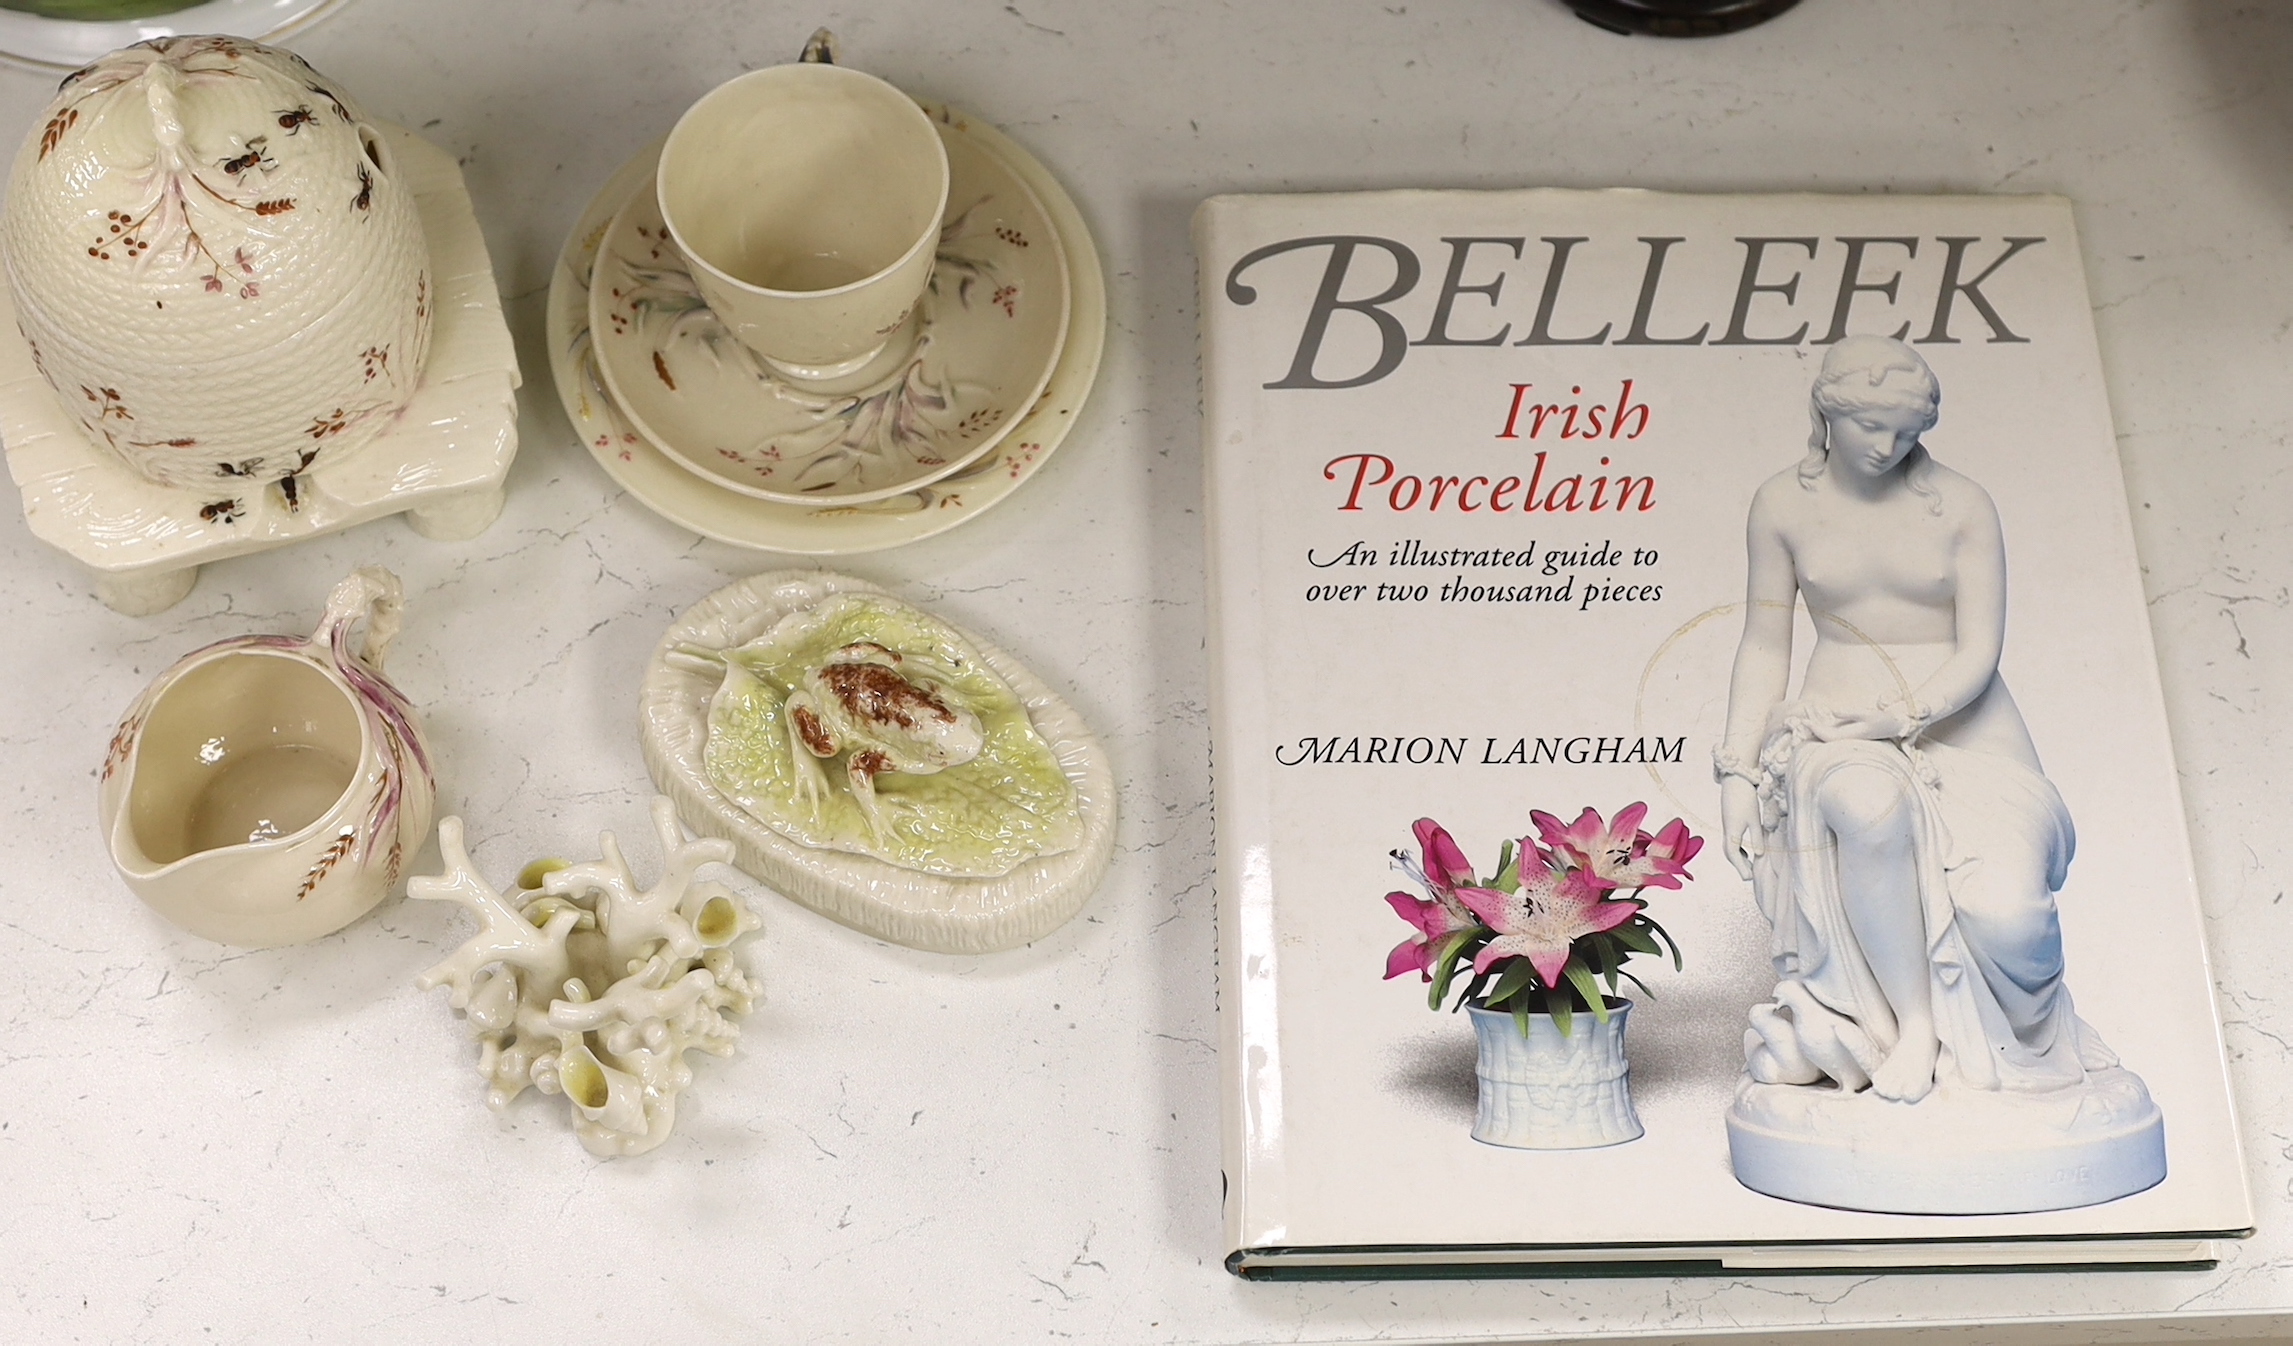 A small quantity of 1st and 2nd period Belleek including a ‘frog’ paperweight and a ‘beehive’ honey jar together with a related reference book by Marion Langham